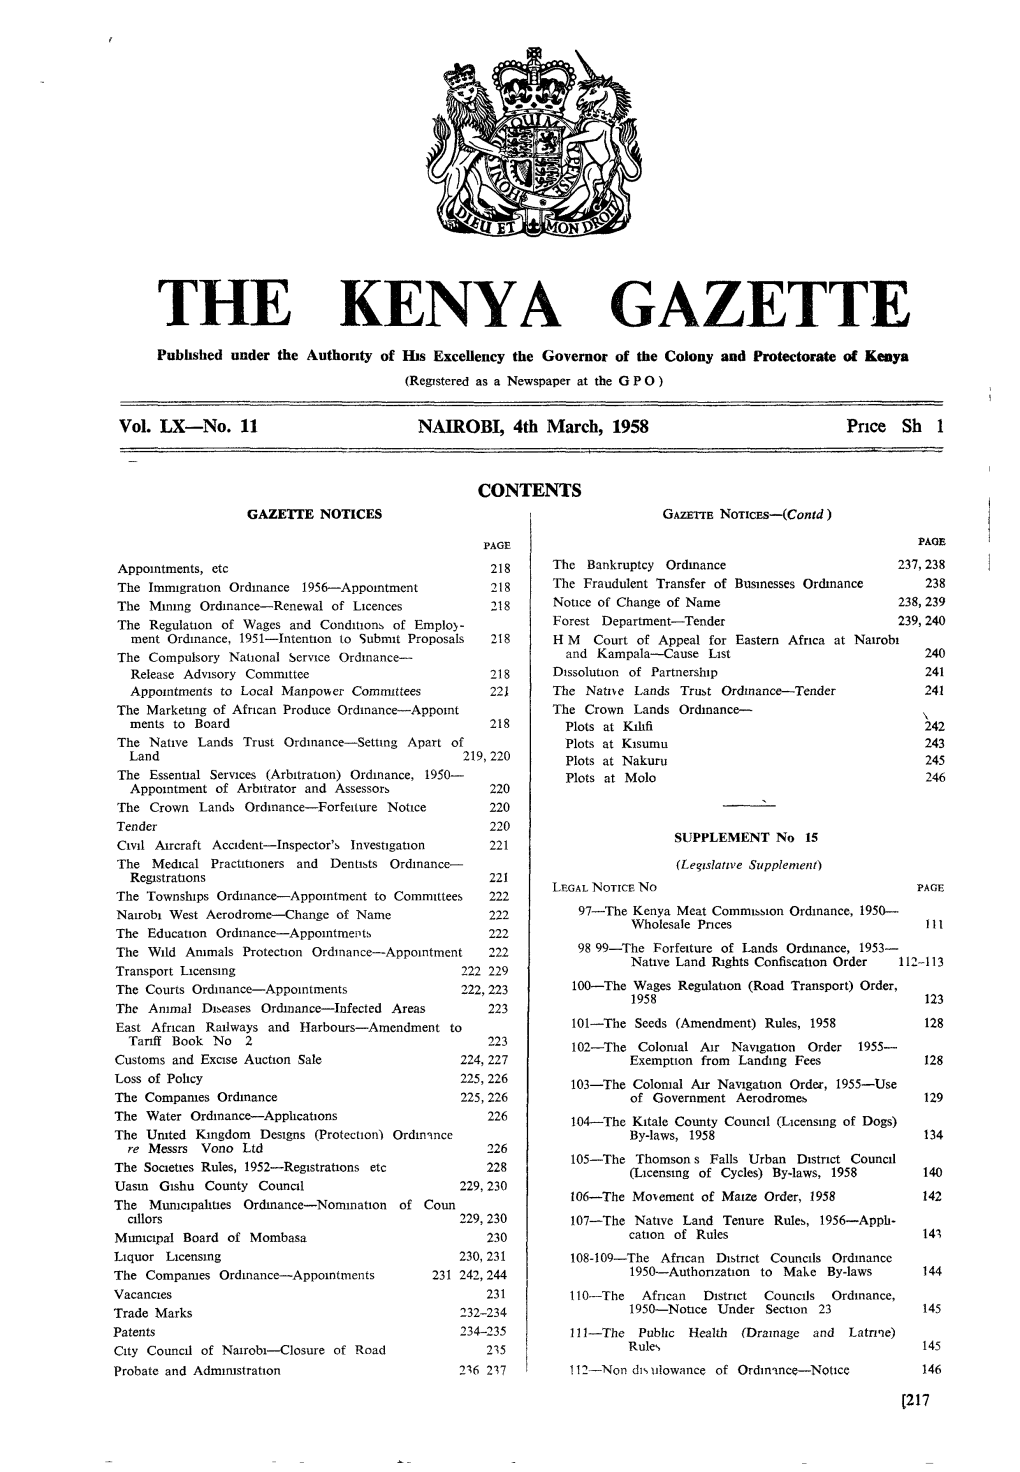 THE KENYA GAZETTE Pubhshed Under the Authority of Ms Excellency the Governor of the Colony and Protectorate of Kenya (Reastered As a Newspaper at the G P 0 )